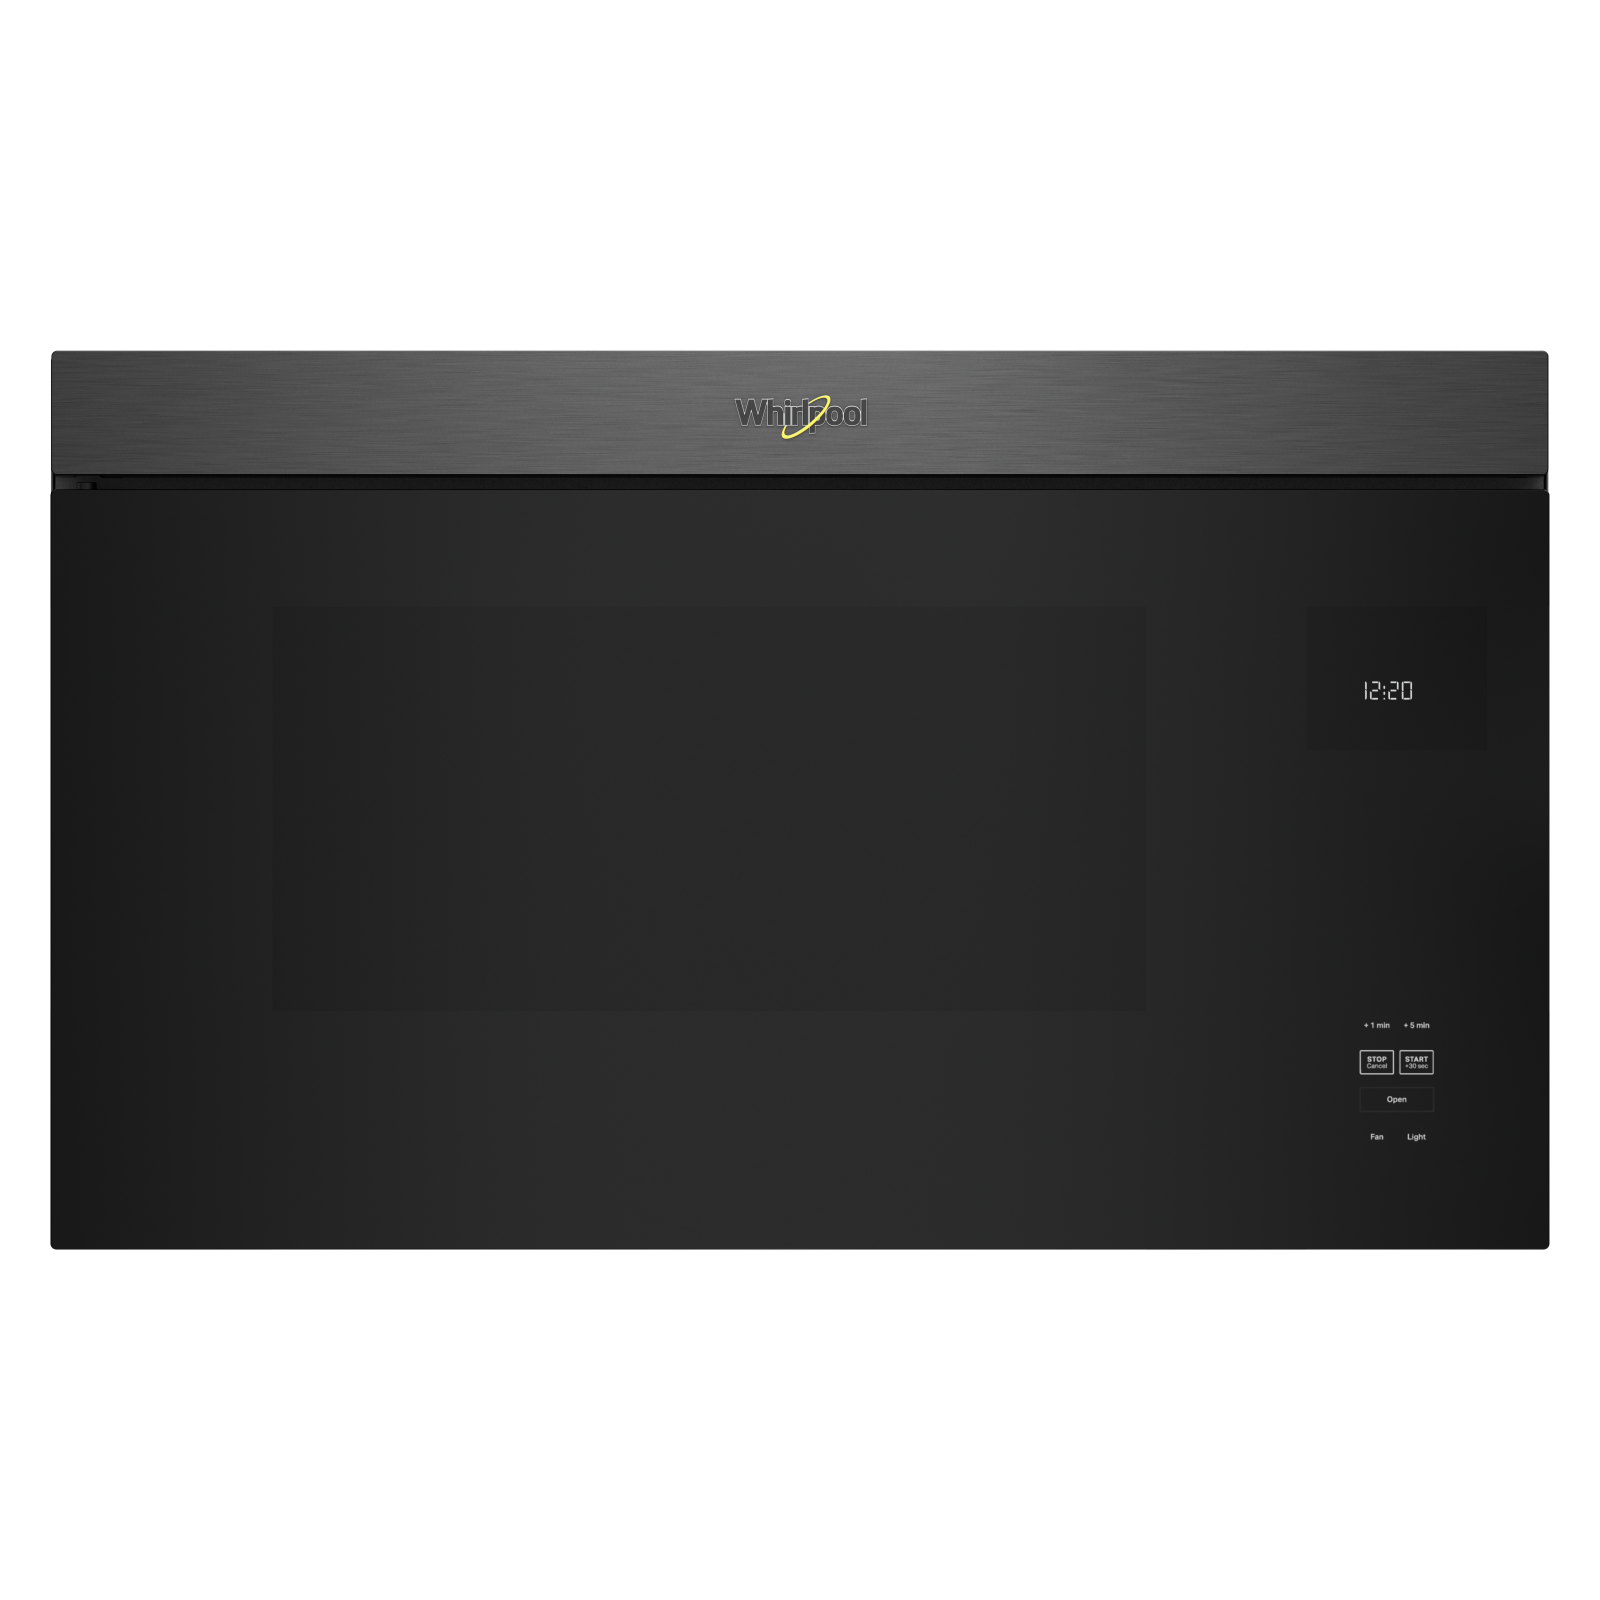 Whirlpool - 1.1 cu. Ft  Over the range Microwave in Black Stainless - YWMMF5930PV